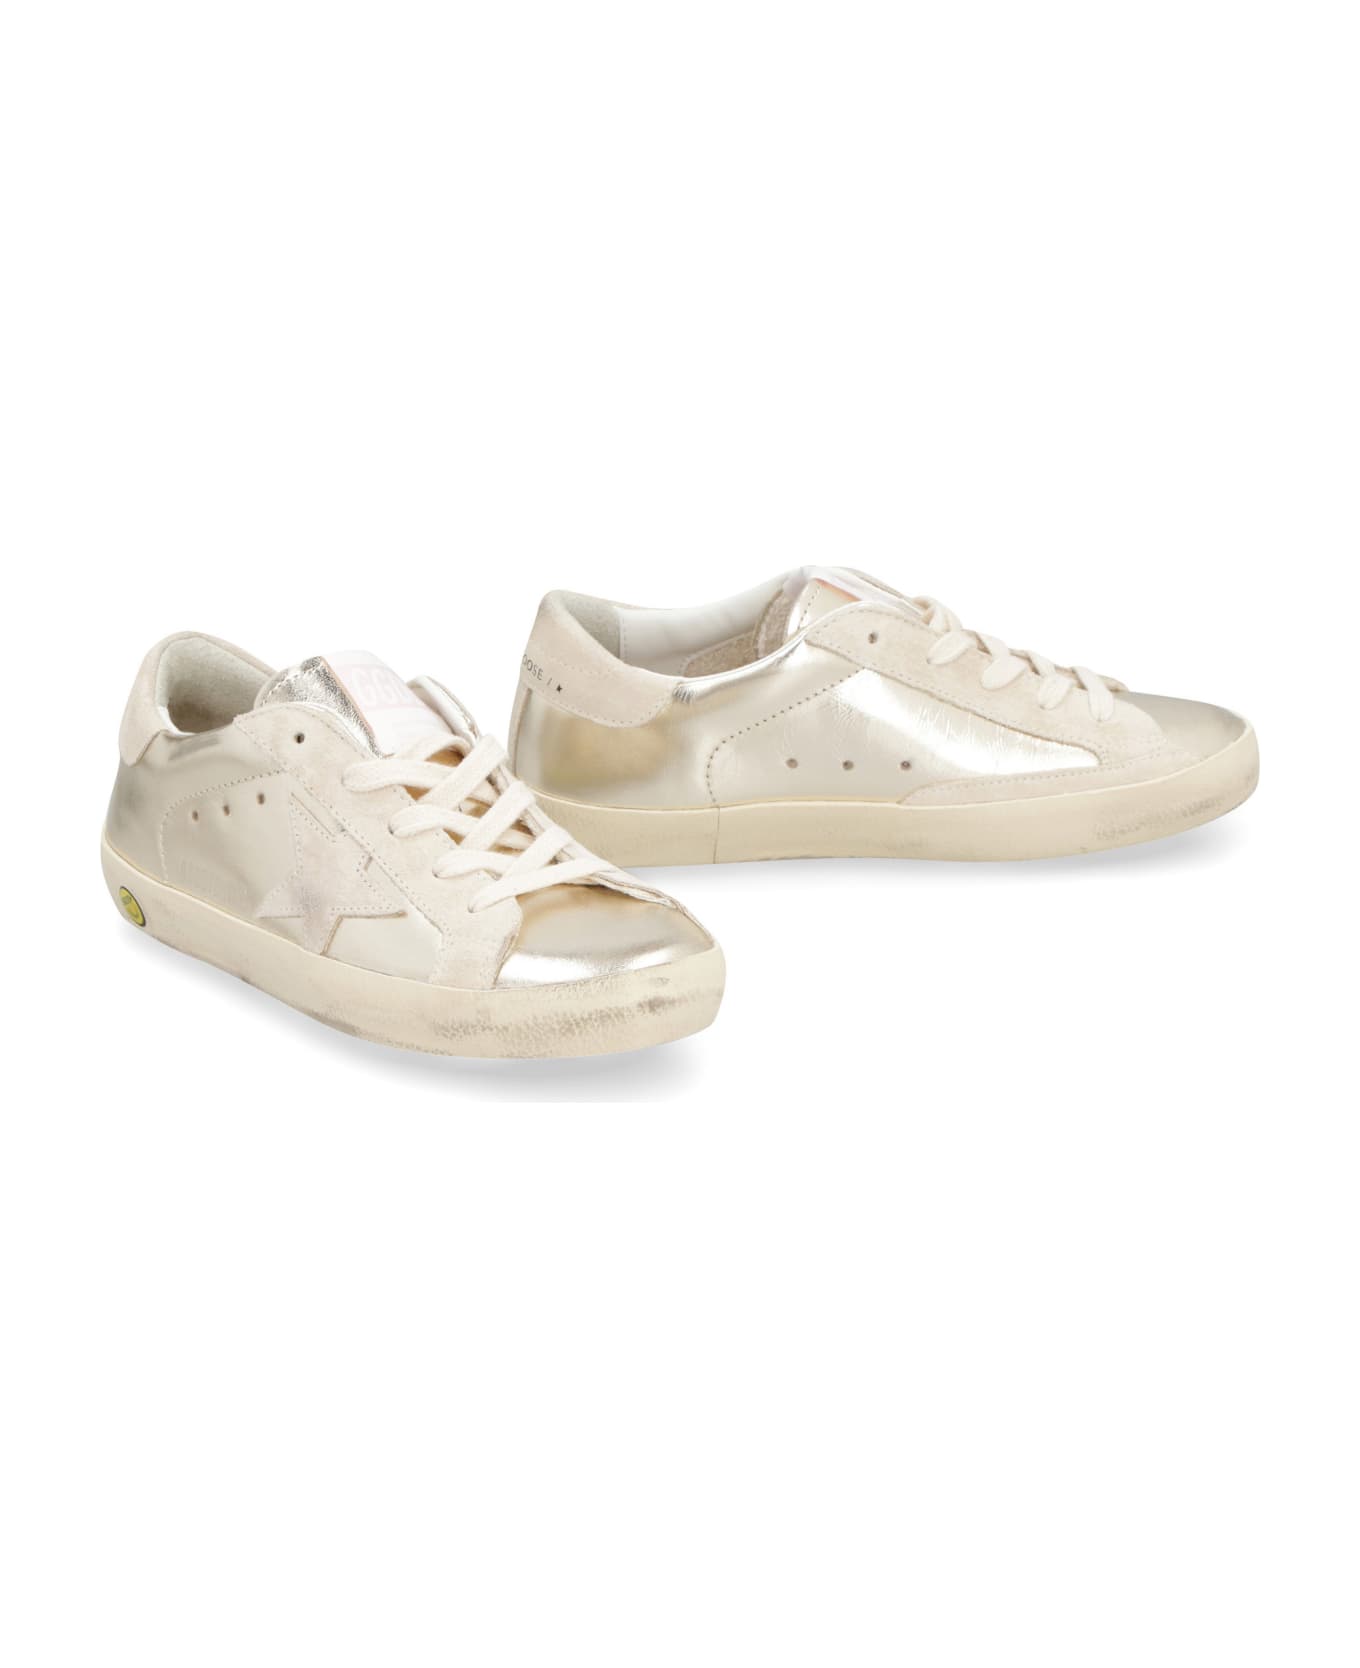 Golden Goose Super Star Leather Sneakers - Silver シューズ